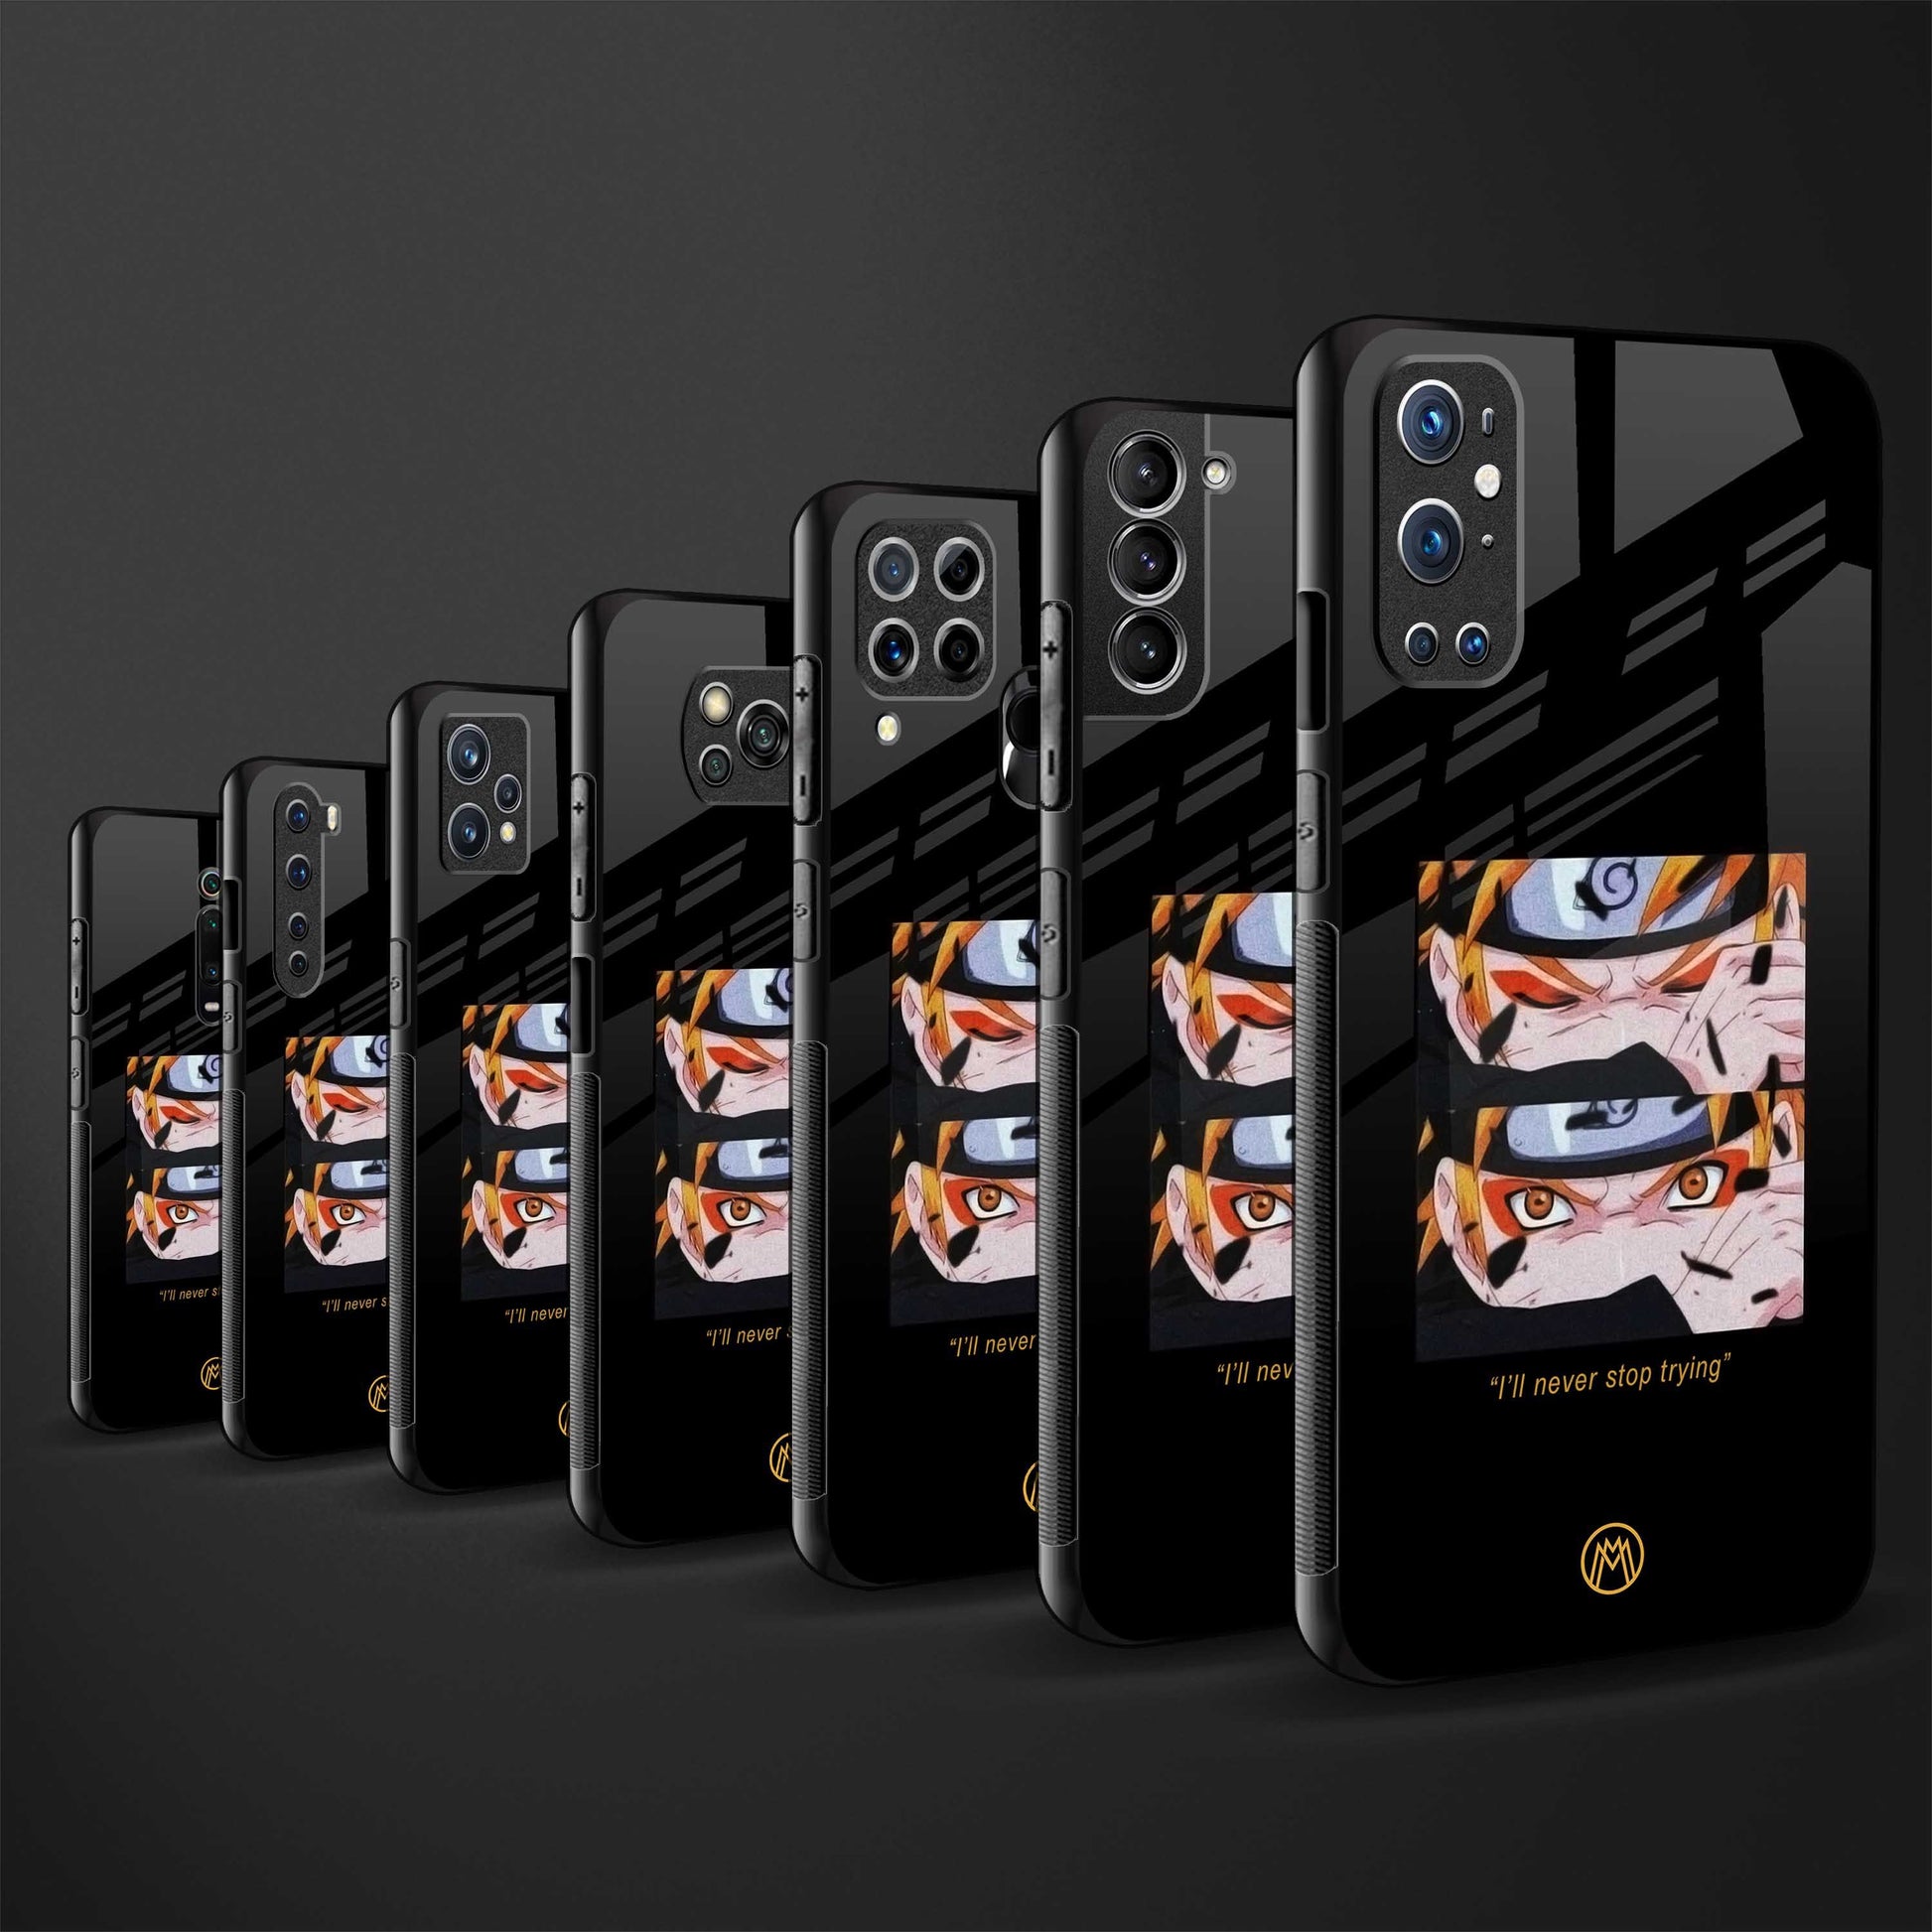 naruto motivation anime back phone cover | glass case for samsung galaxy a73 5g